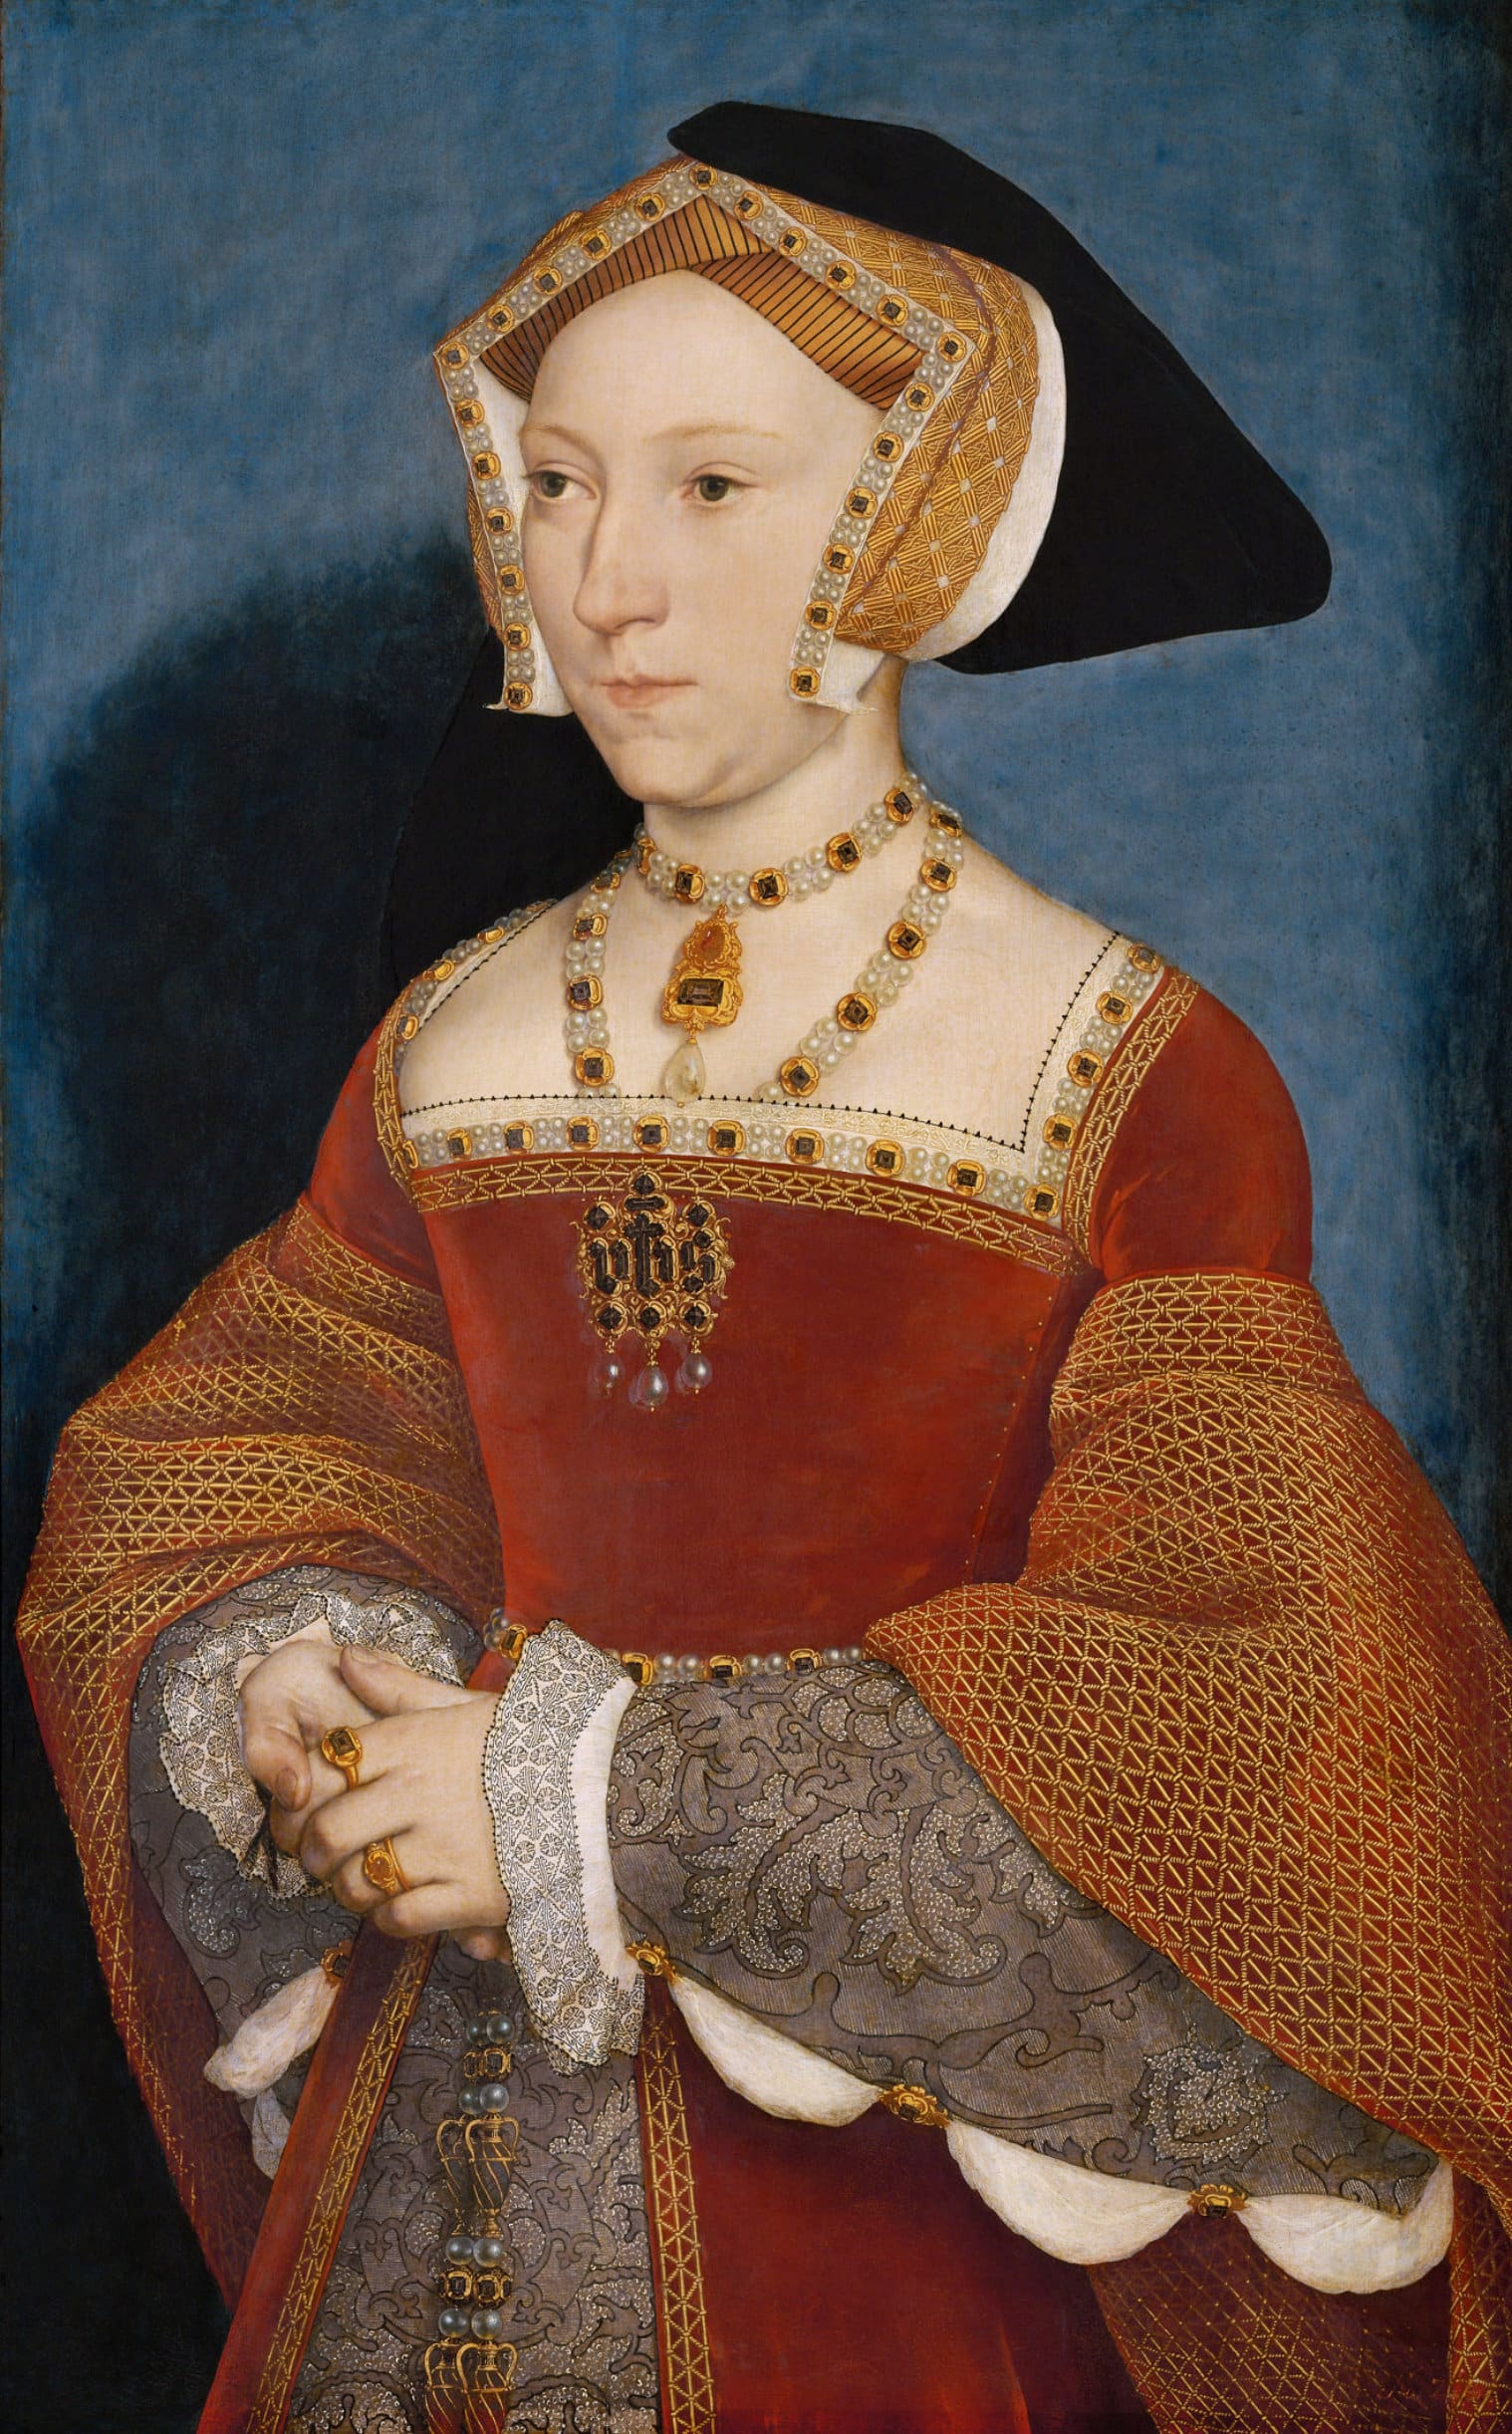 Portrait of Jane Seymour by Hans Holbein the Younger c.1536-37.